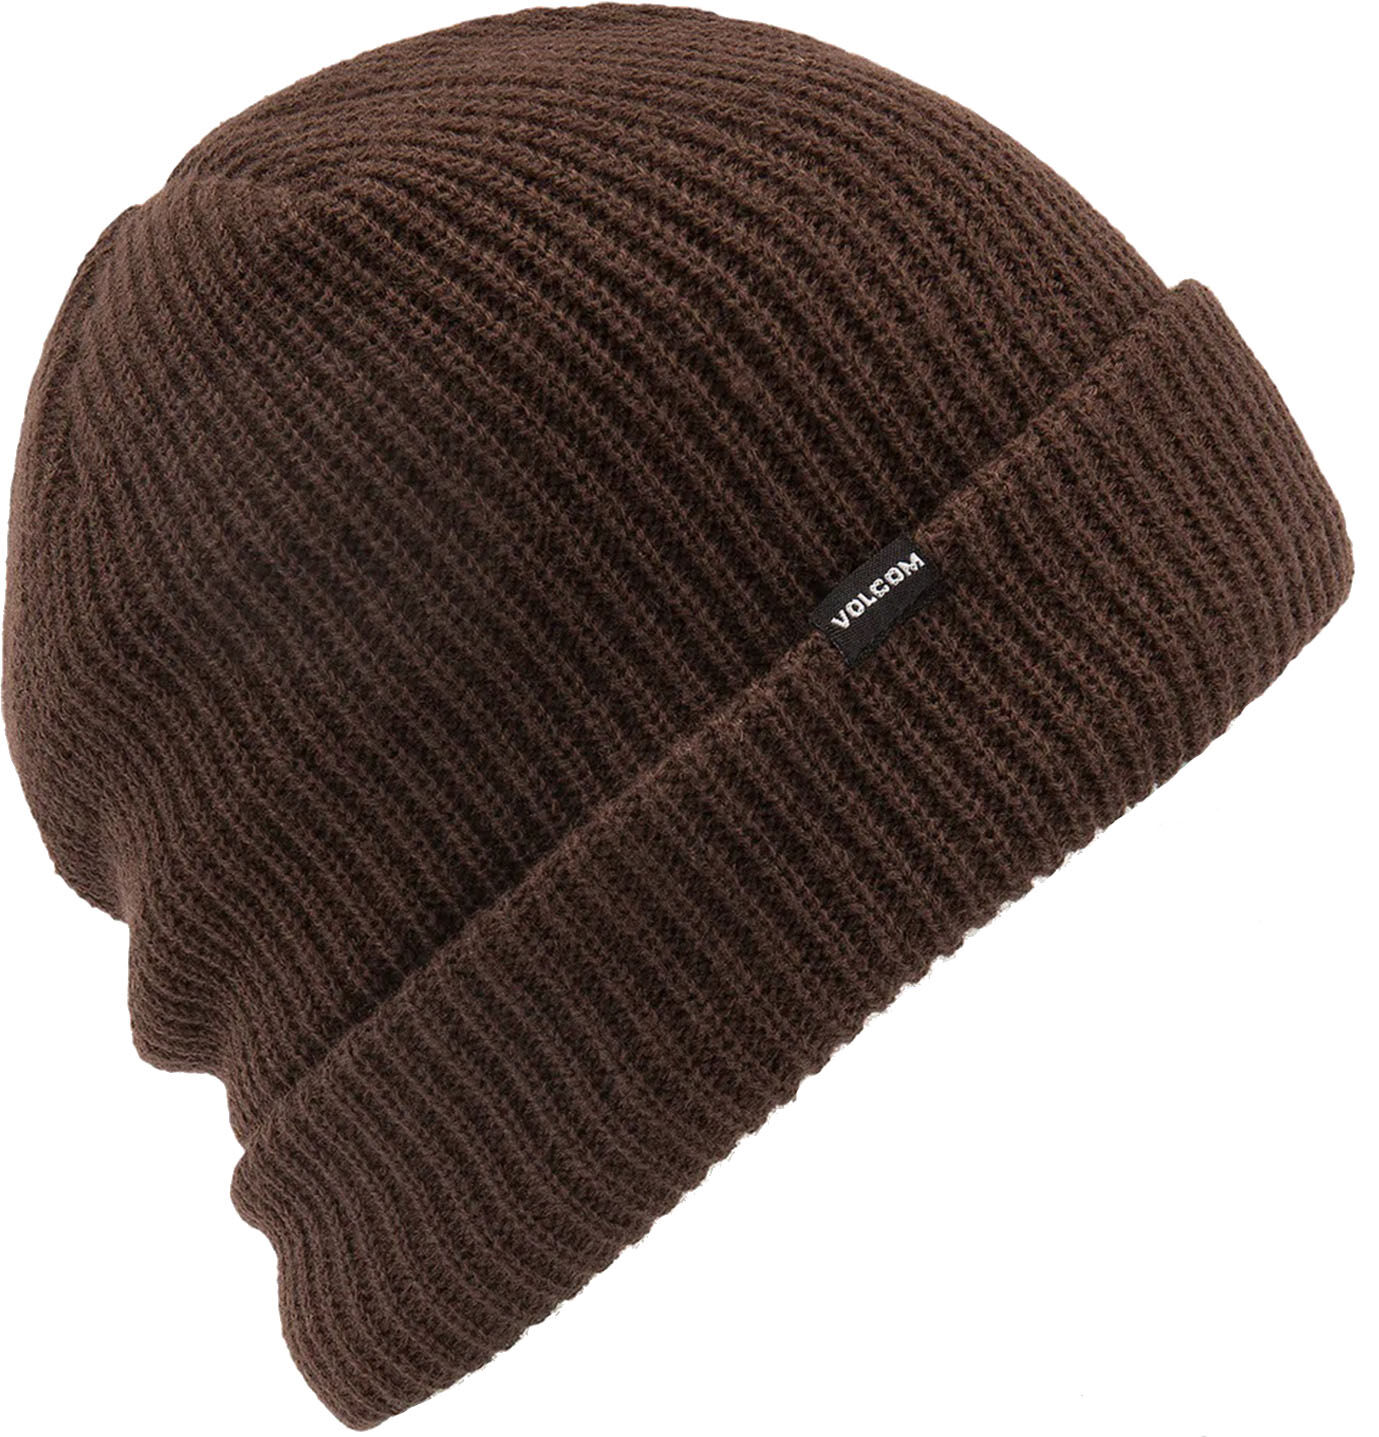 Volcom SWEEP LINED BEANIE BROWN One Size